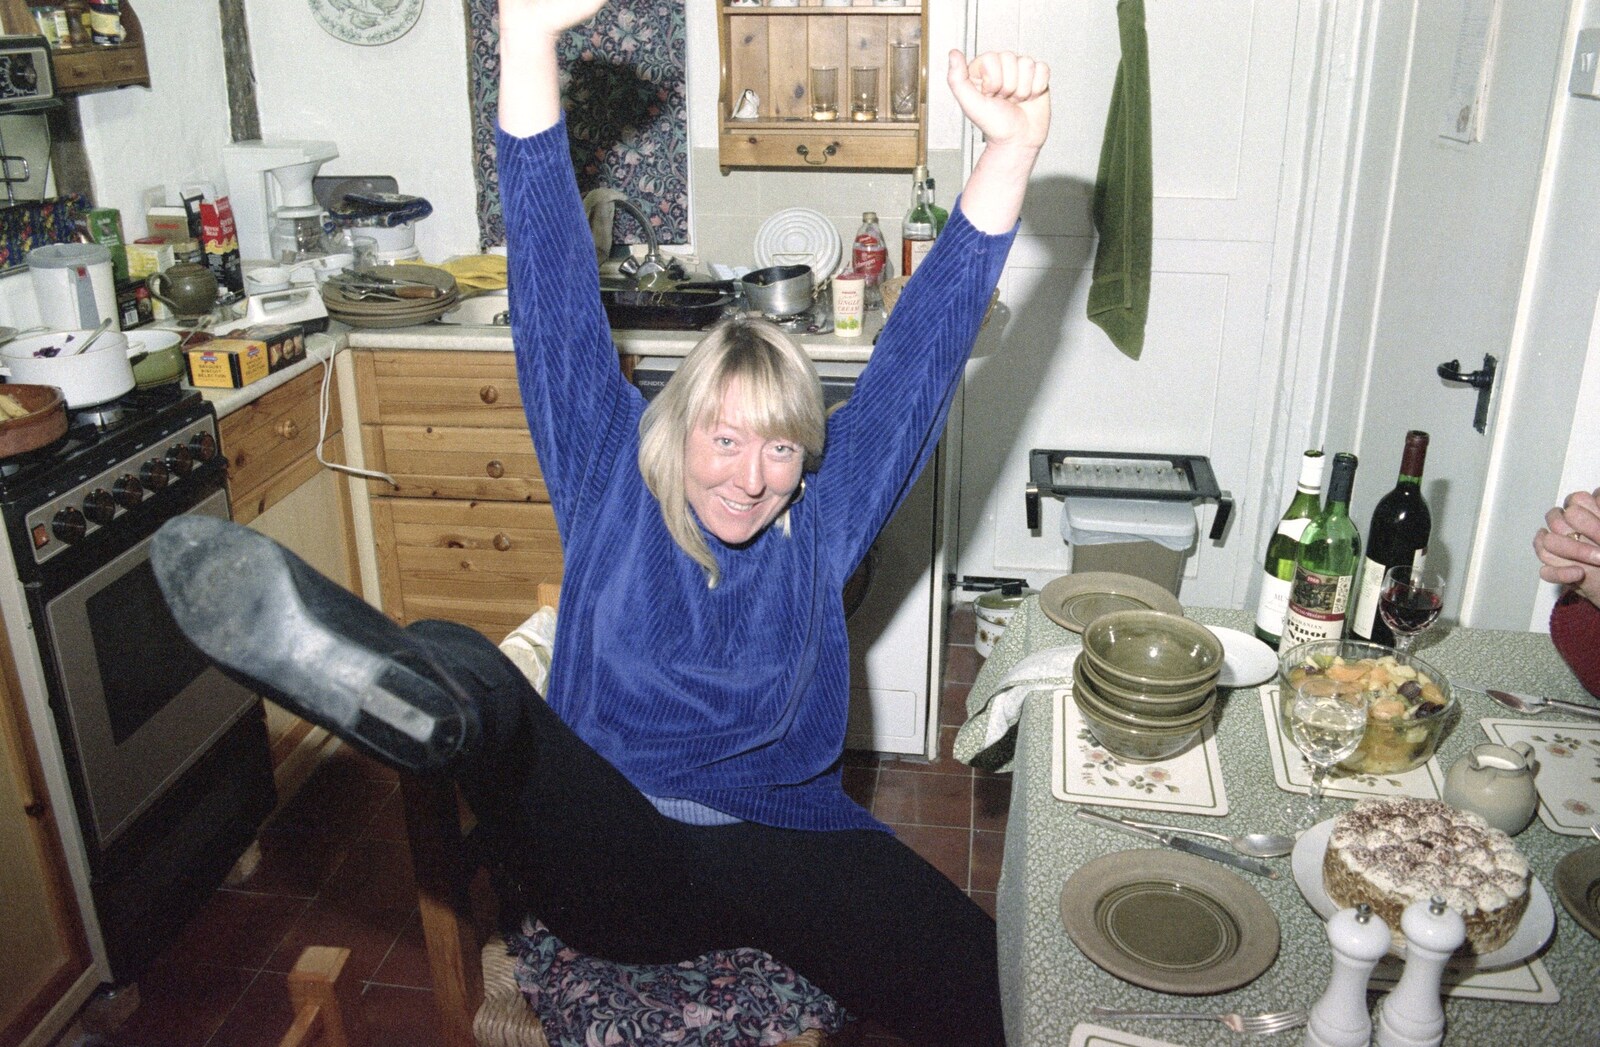 Sue does one of her trademark mad shapes from Lunch and Dinner at Mad Sue's, Stuston, Suffolk - 30th March 1995